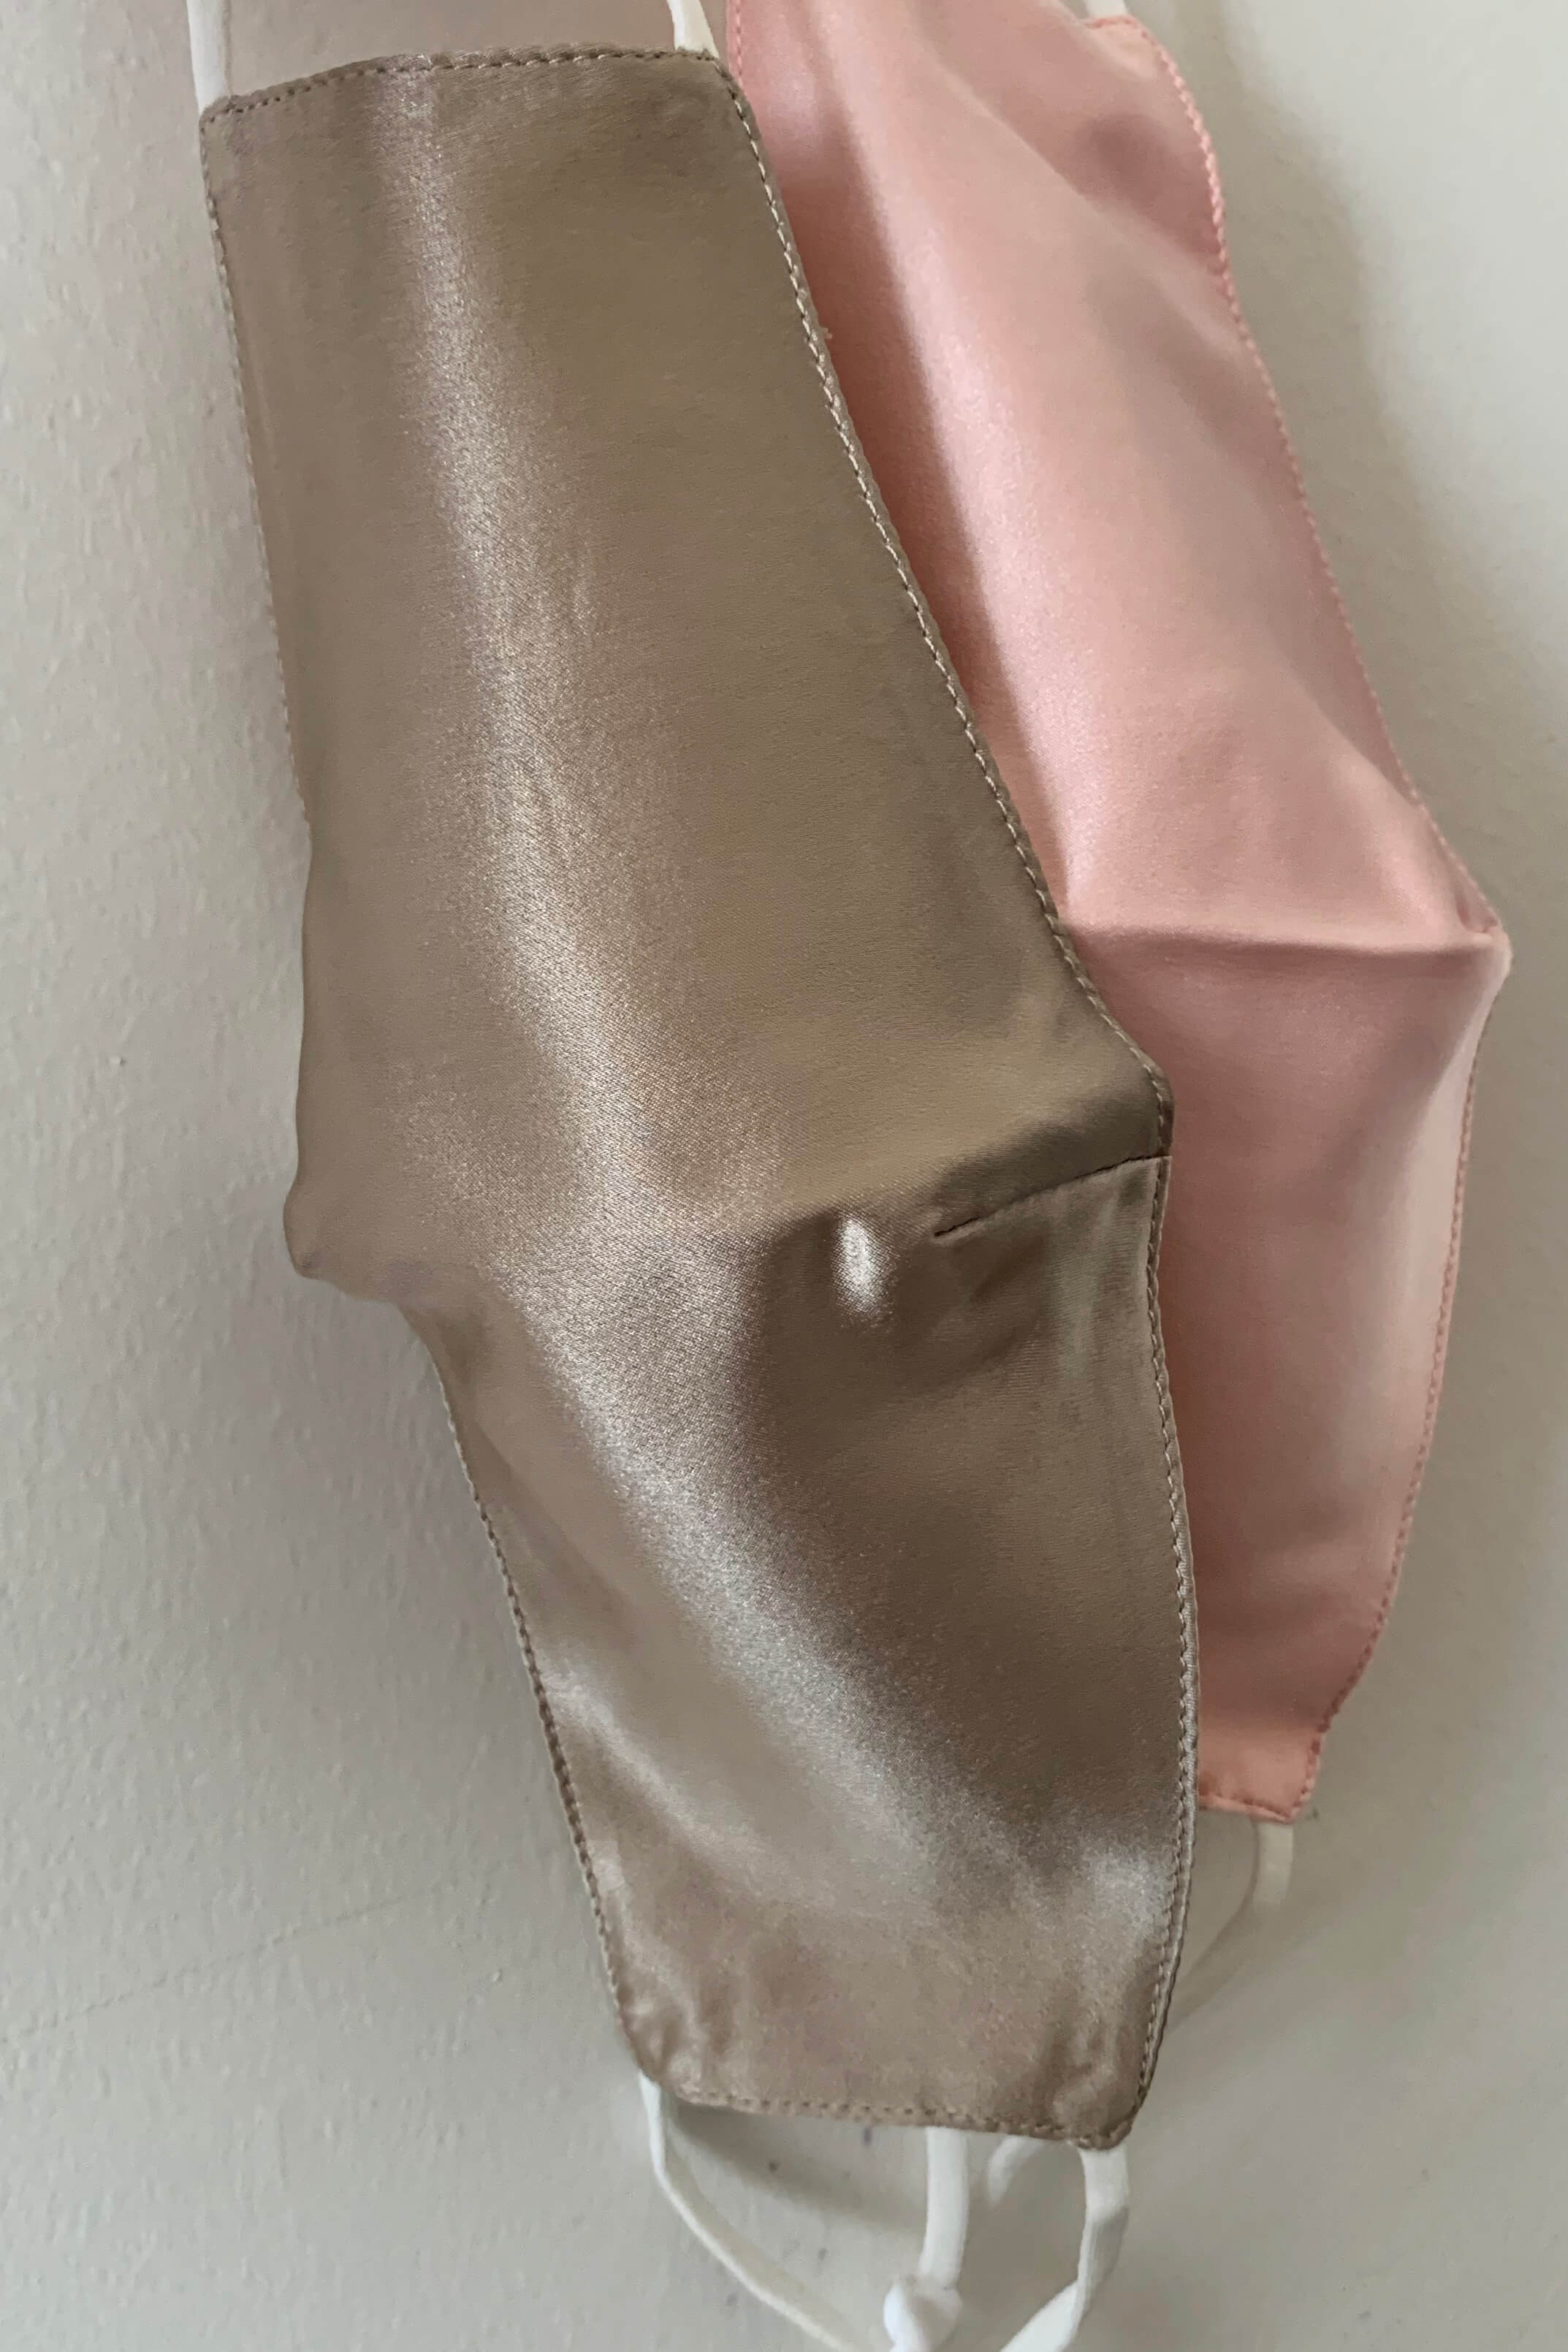 ULTRA Silk Face Covering - Champagne Gold (No filter pocket. No nose wire) - BASK ™